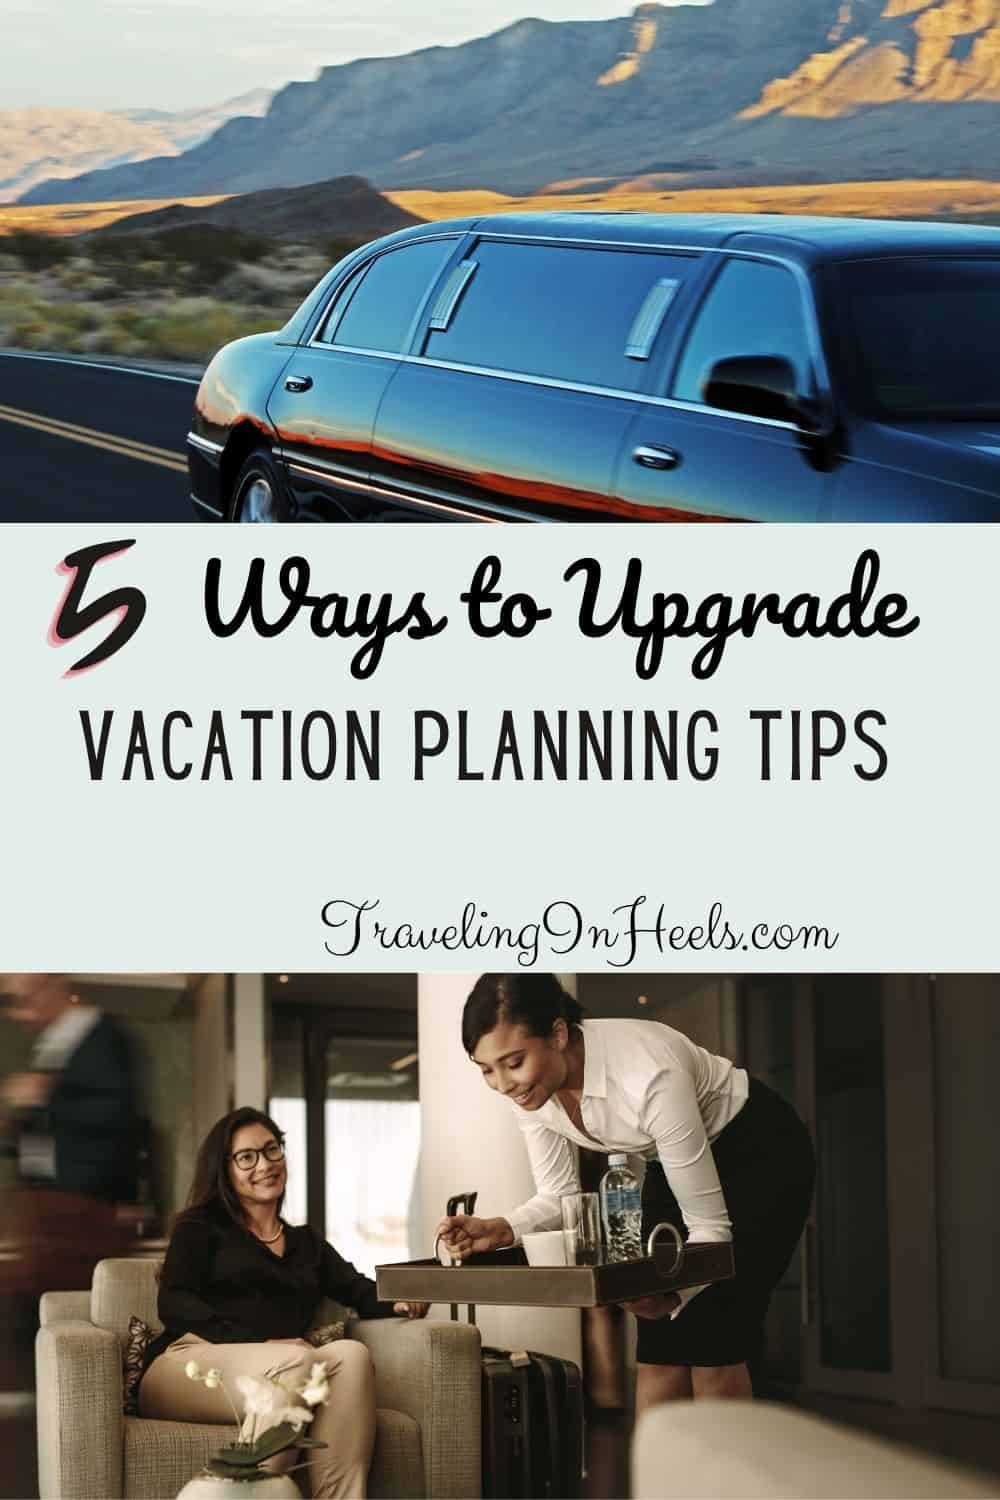 5 ways to upgrade your vacation planning tips #upgradeyourvacation #vacationplanningtips #luxurytravel #traveltips